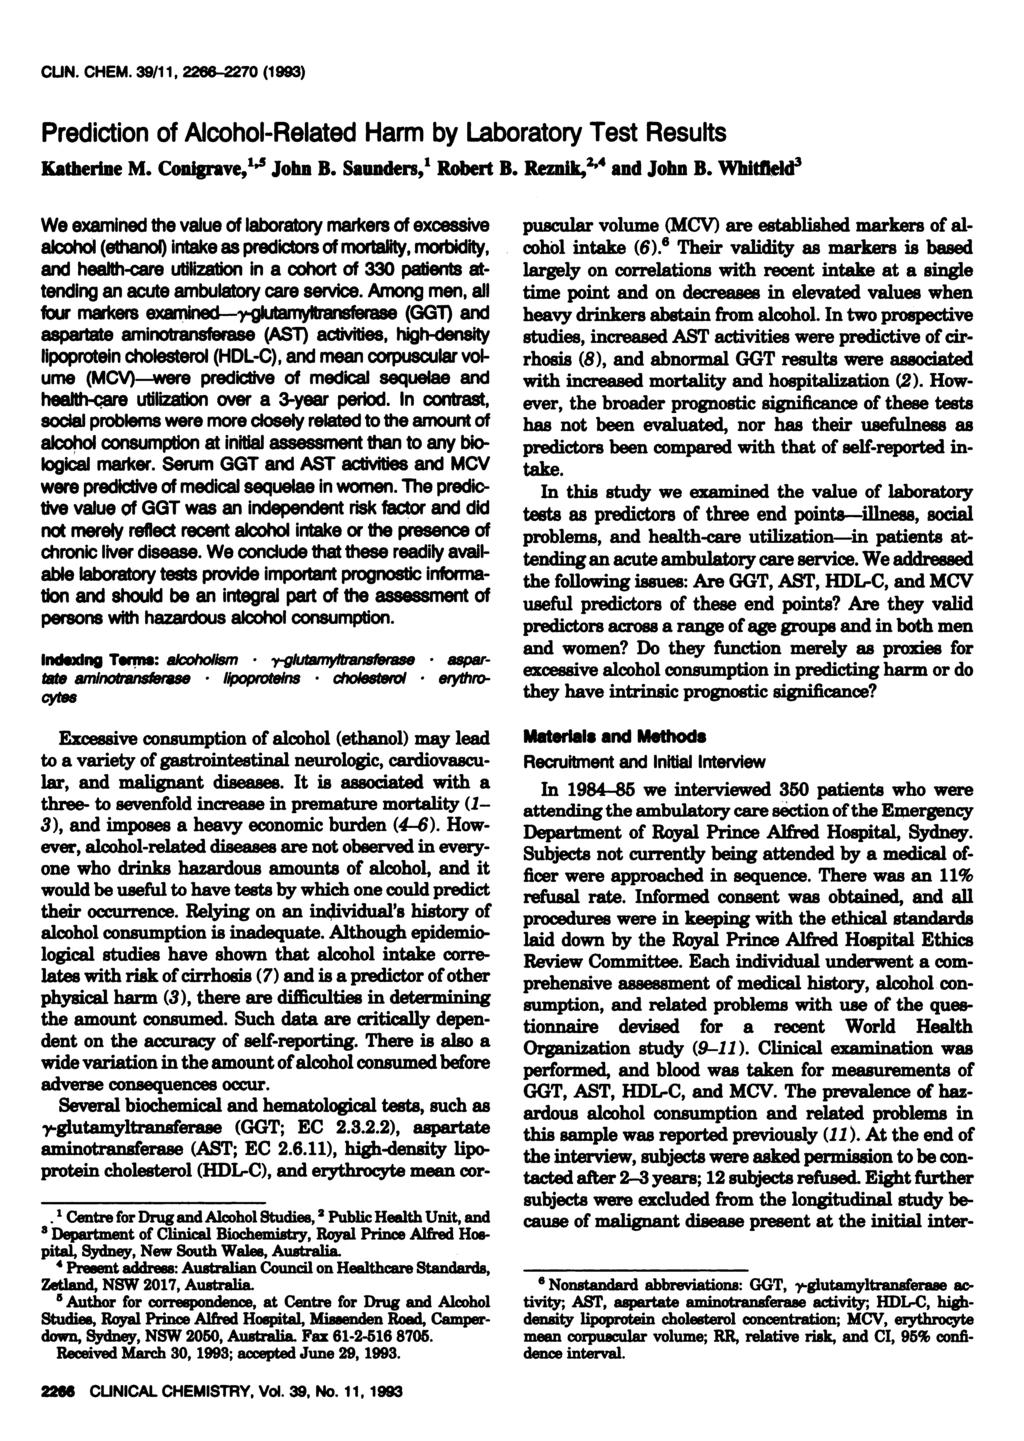 CUN. CHEM. 39/11, 2266-2270 (1993) Prediction of Alcohol-Related Harm by Laboratory Test Results Katherine M. Conigrave,1 5 John B. Saunders, Robert B. Reznlk,2 4 and John B.